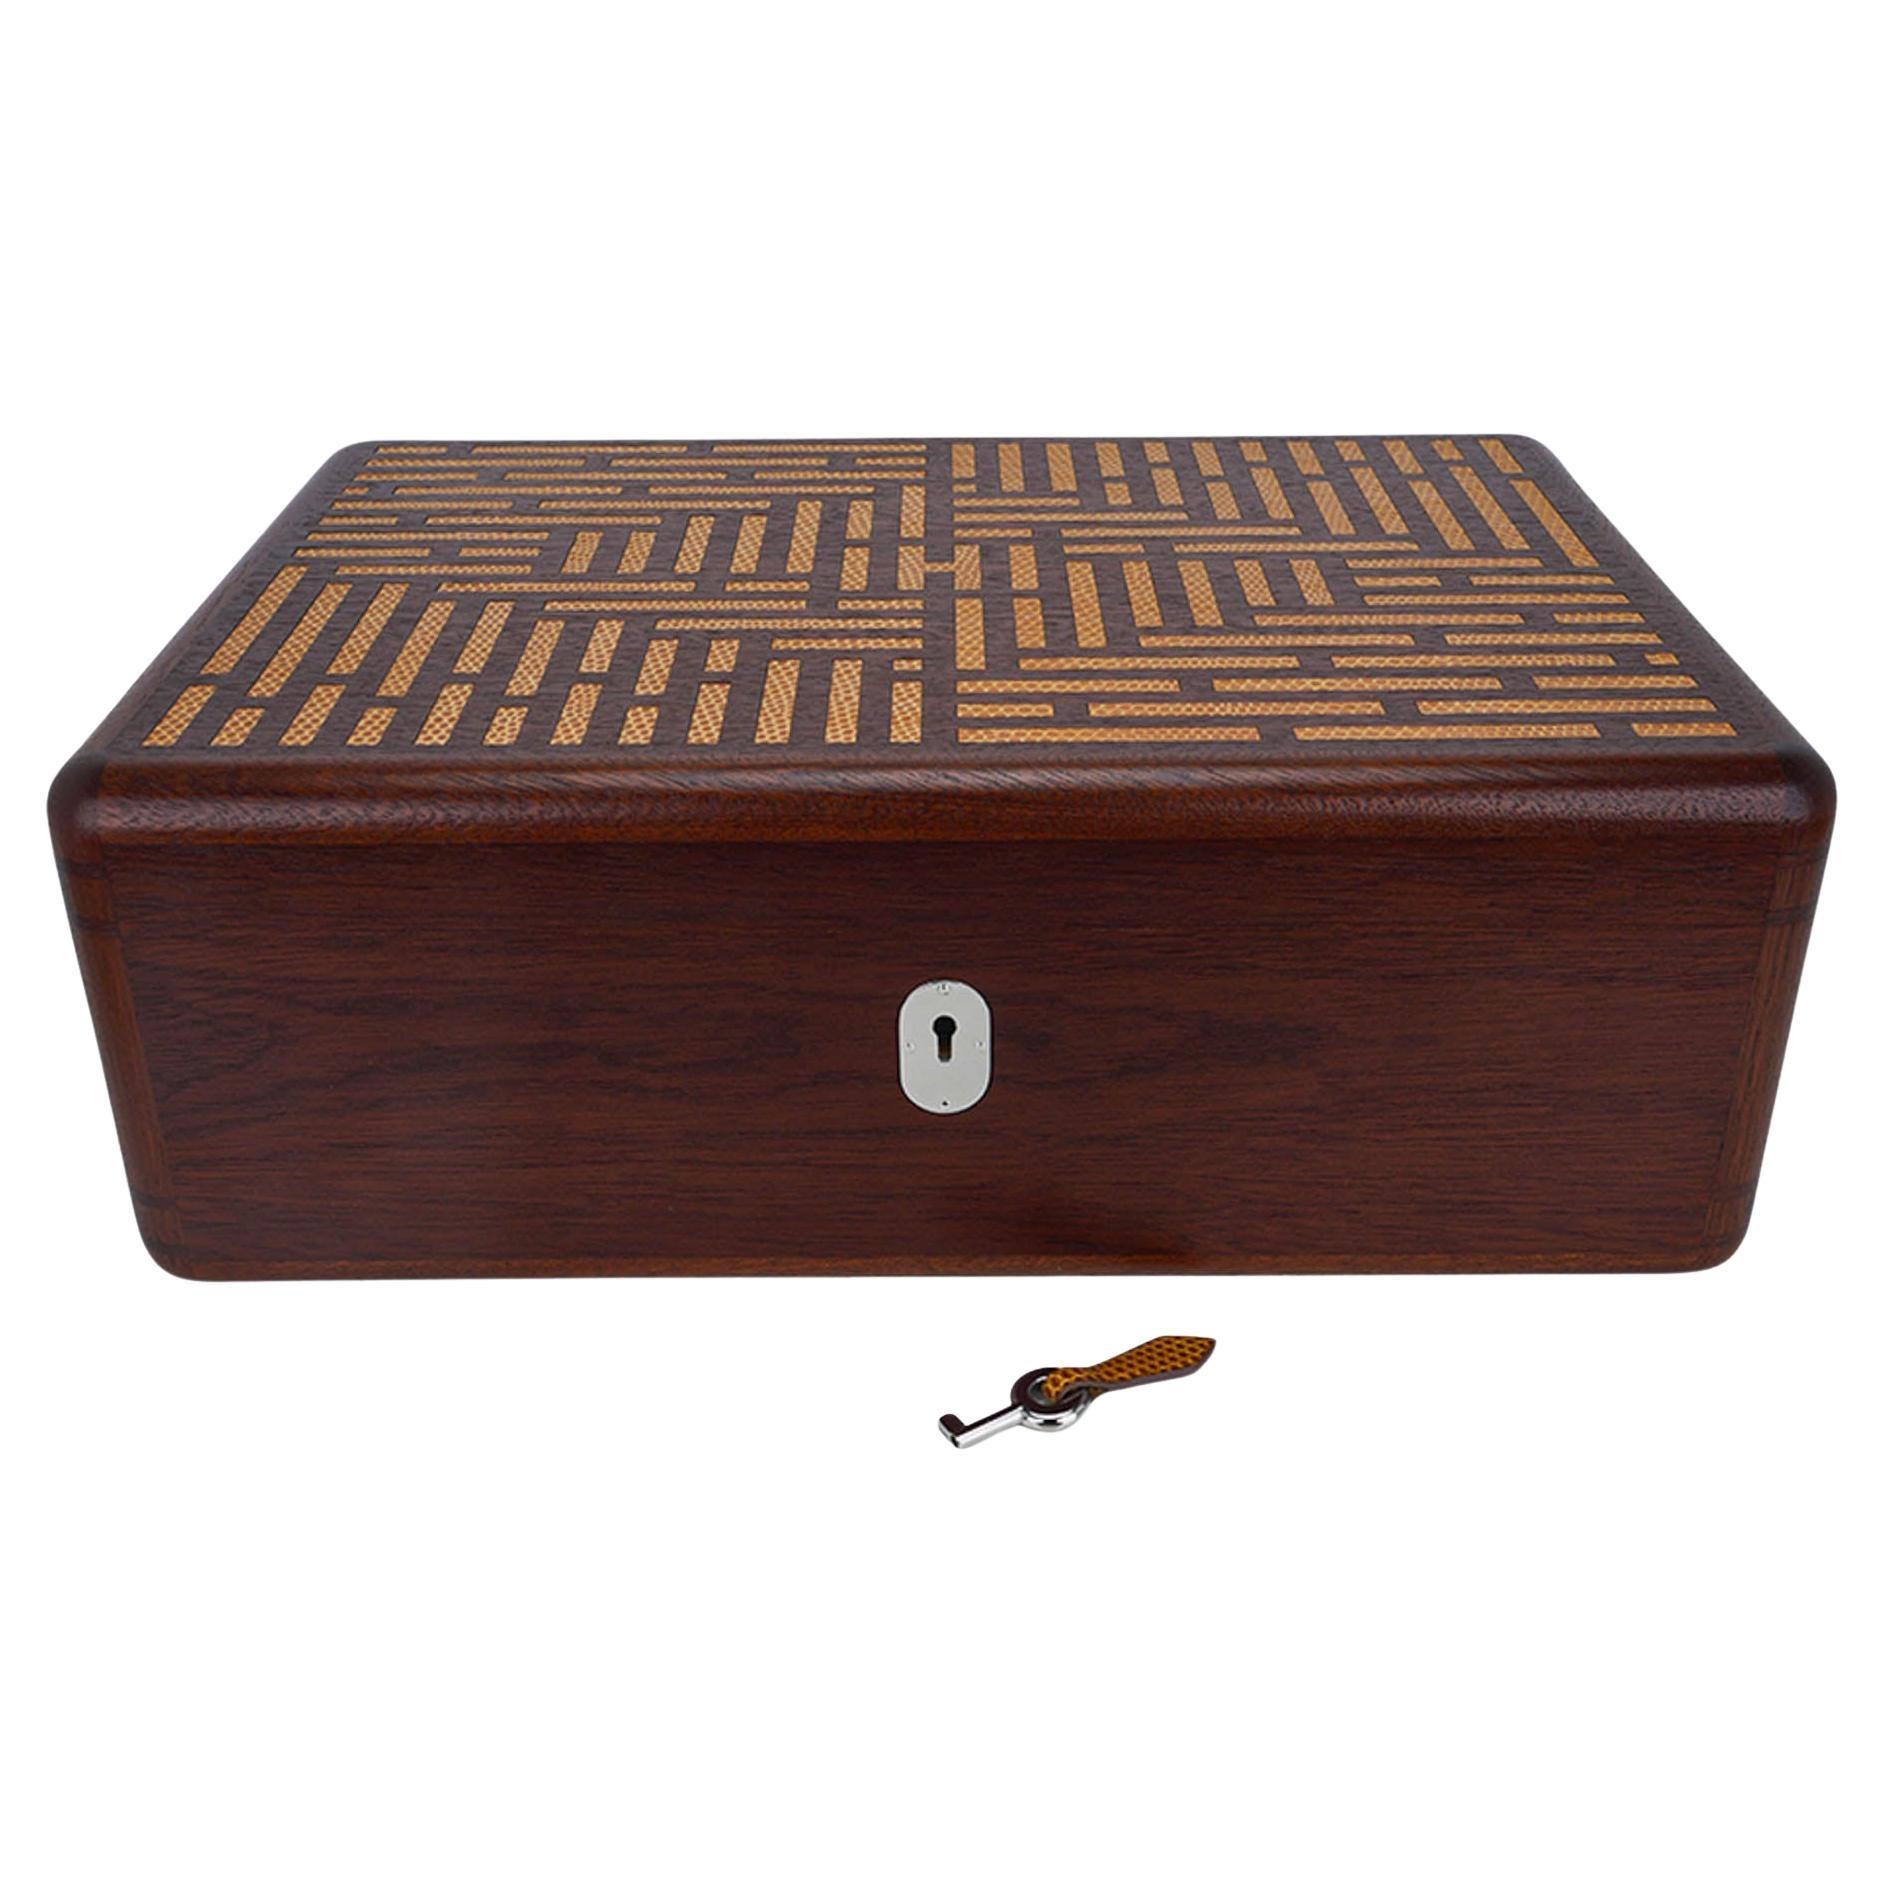 Mightychic offers an Hermes Coffret a Cigares Humidor cigar storage box.
Featured in Sycamore wood with inlaid lizard in Sesame.
Inlays form 